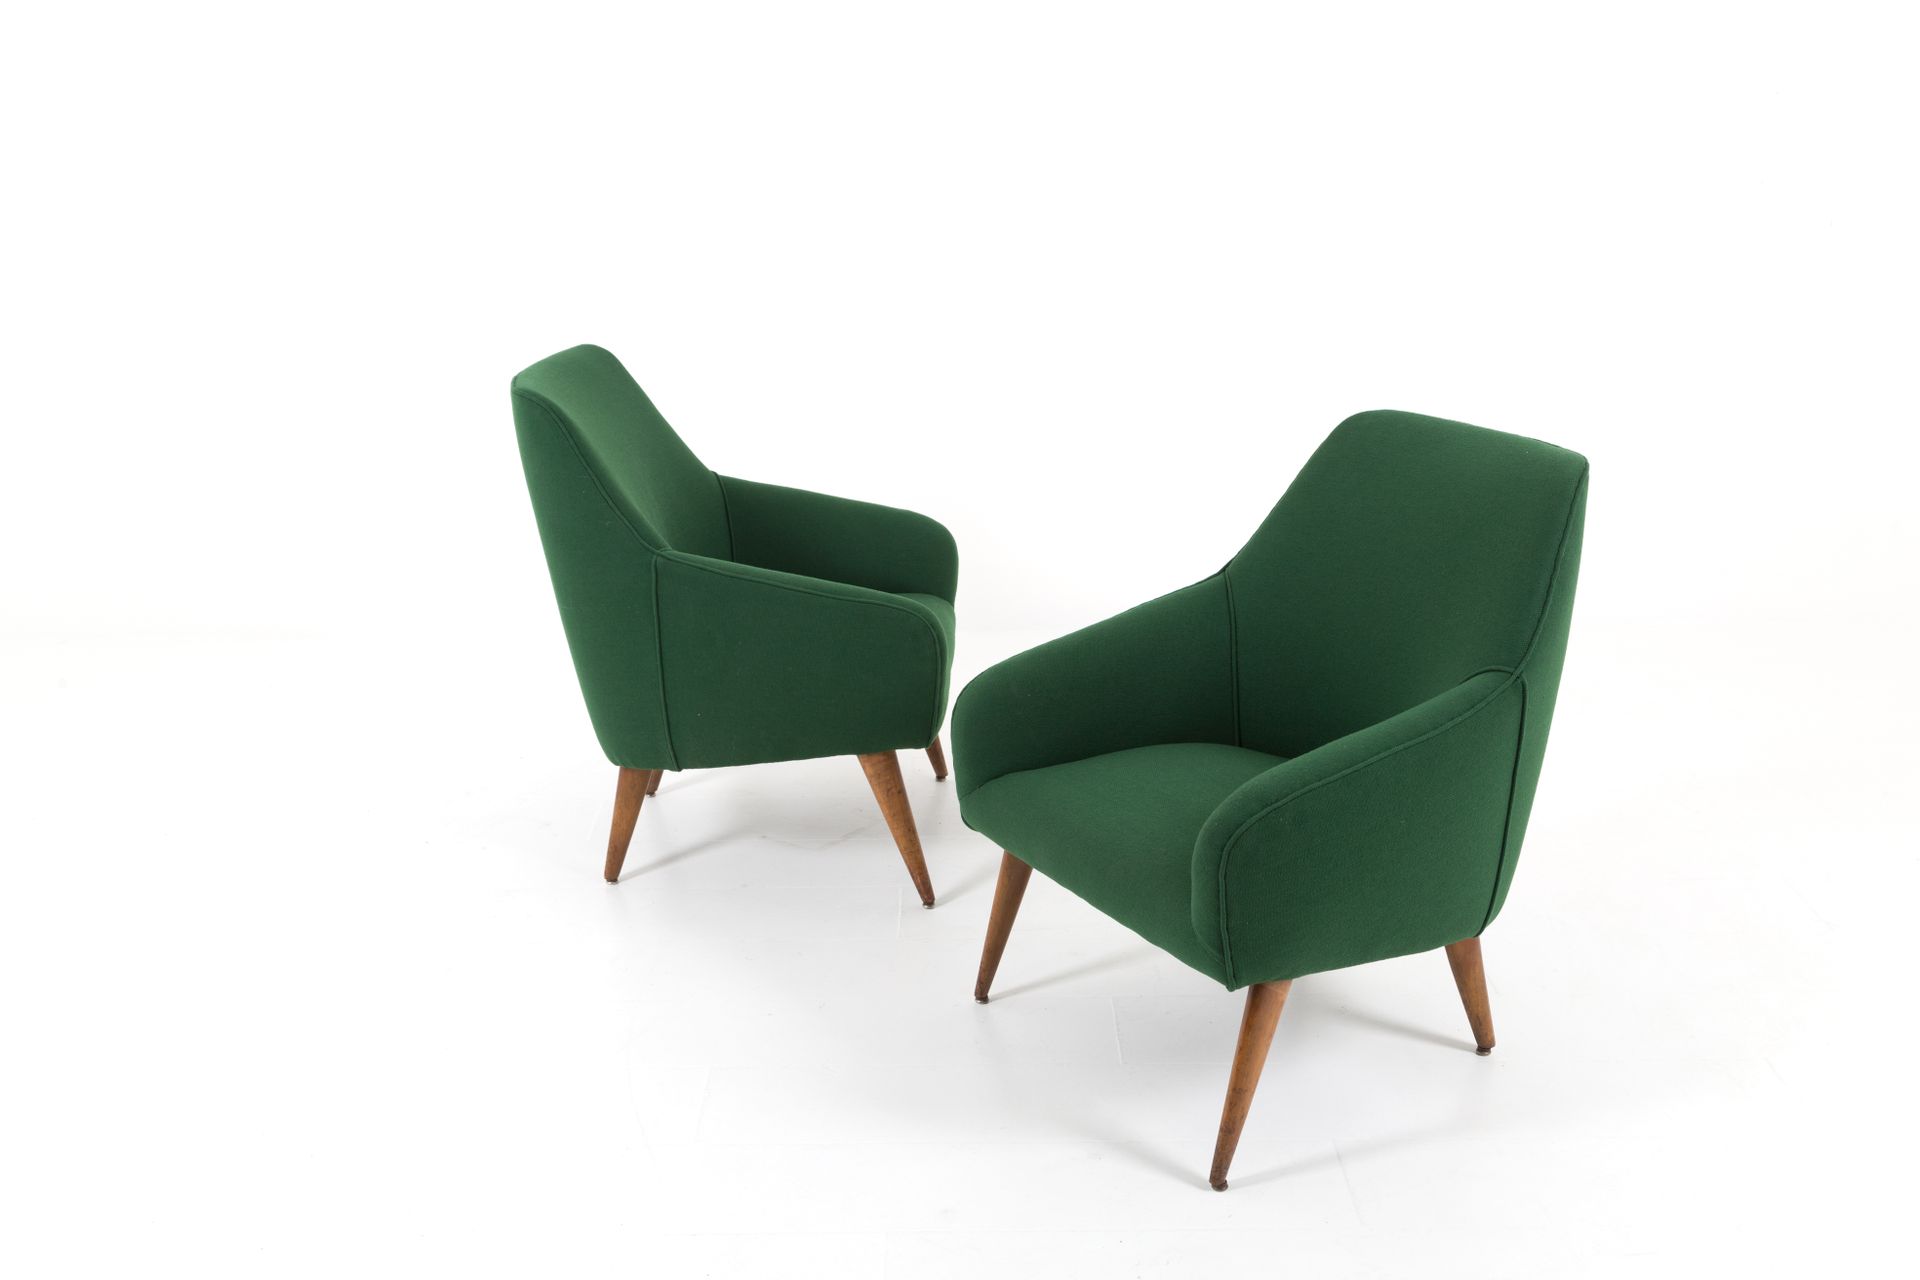 GIO PONTI for CASSINA. Pair of wooden armchairs GIO PONTI（米兰，1891-1979）为CASSINA设&hellip;